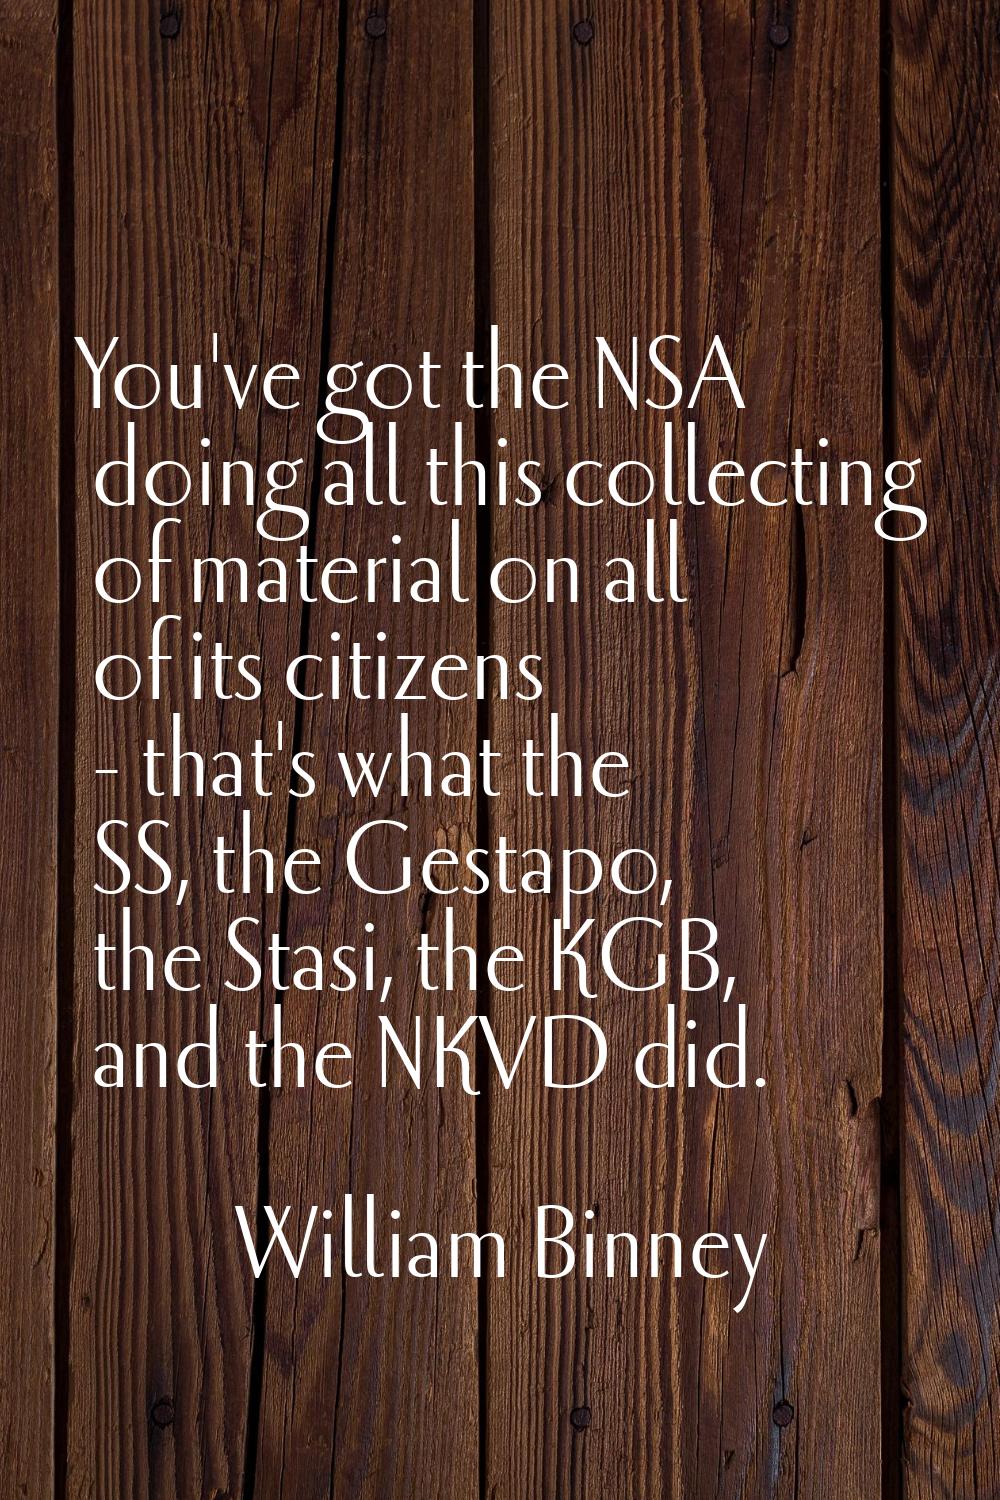 You've got the NSA doing all this collecting of material on all of its citizens - that's what the S